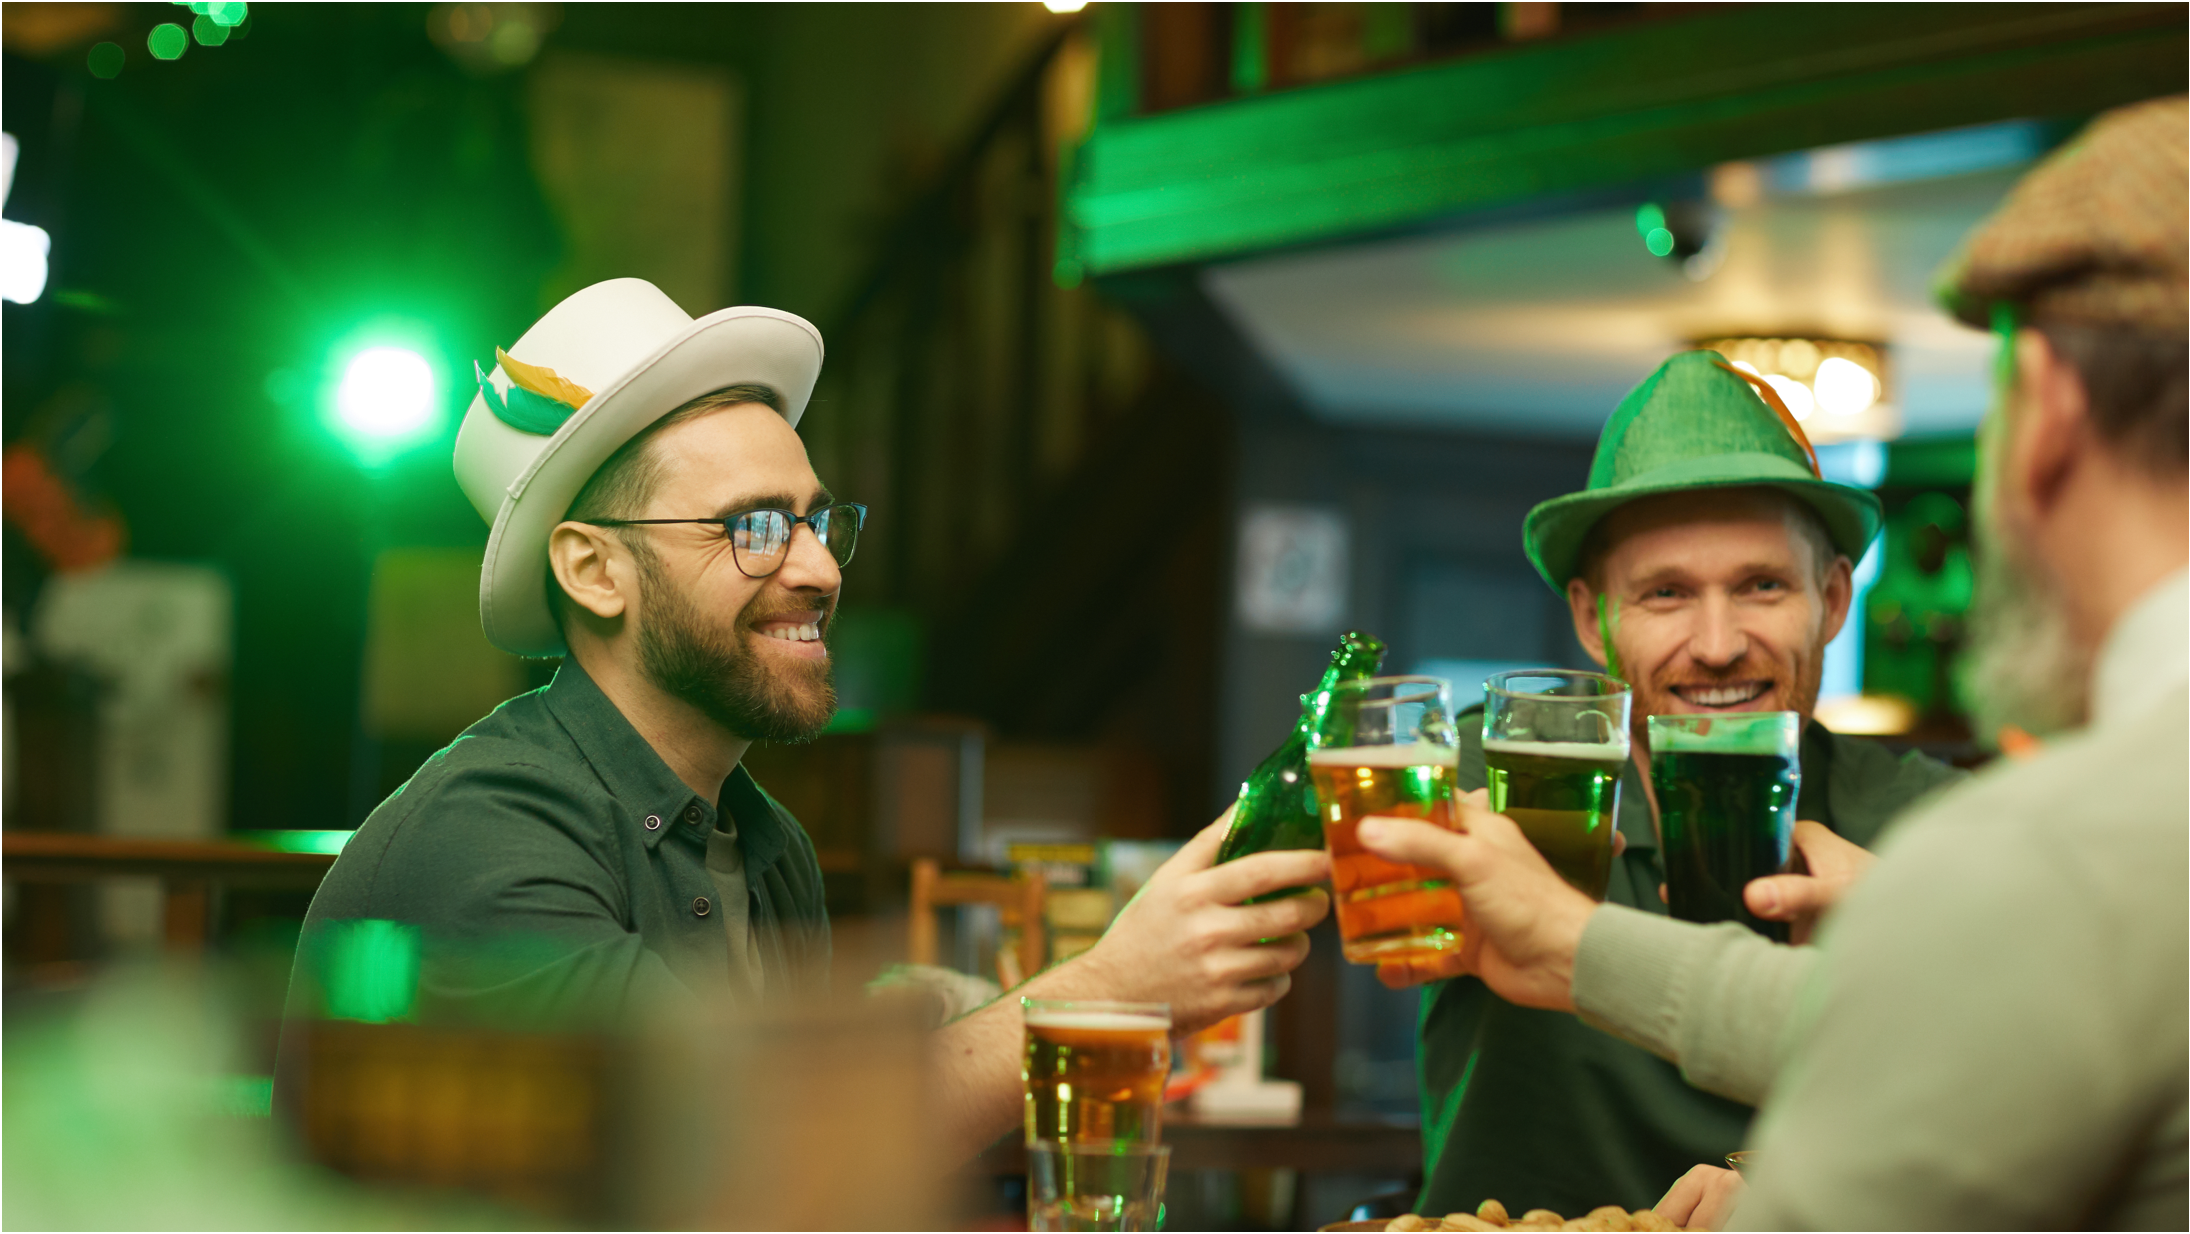 Men in festive attire drinking on St. Patrick's Day at a bar